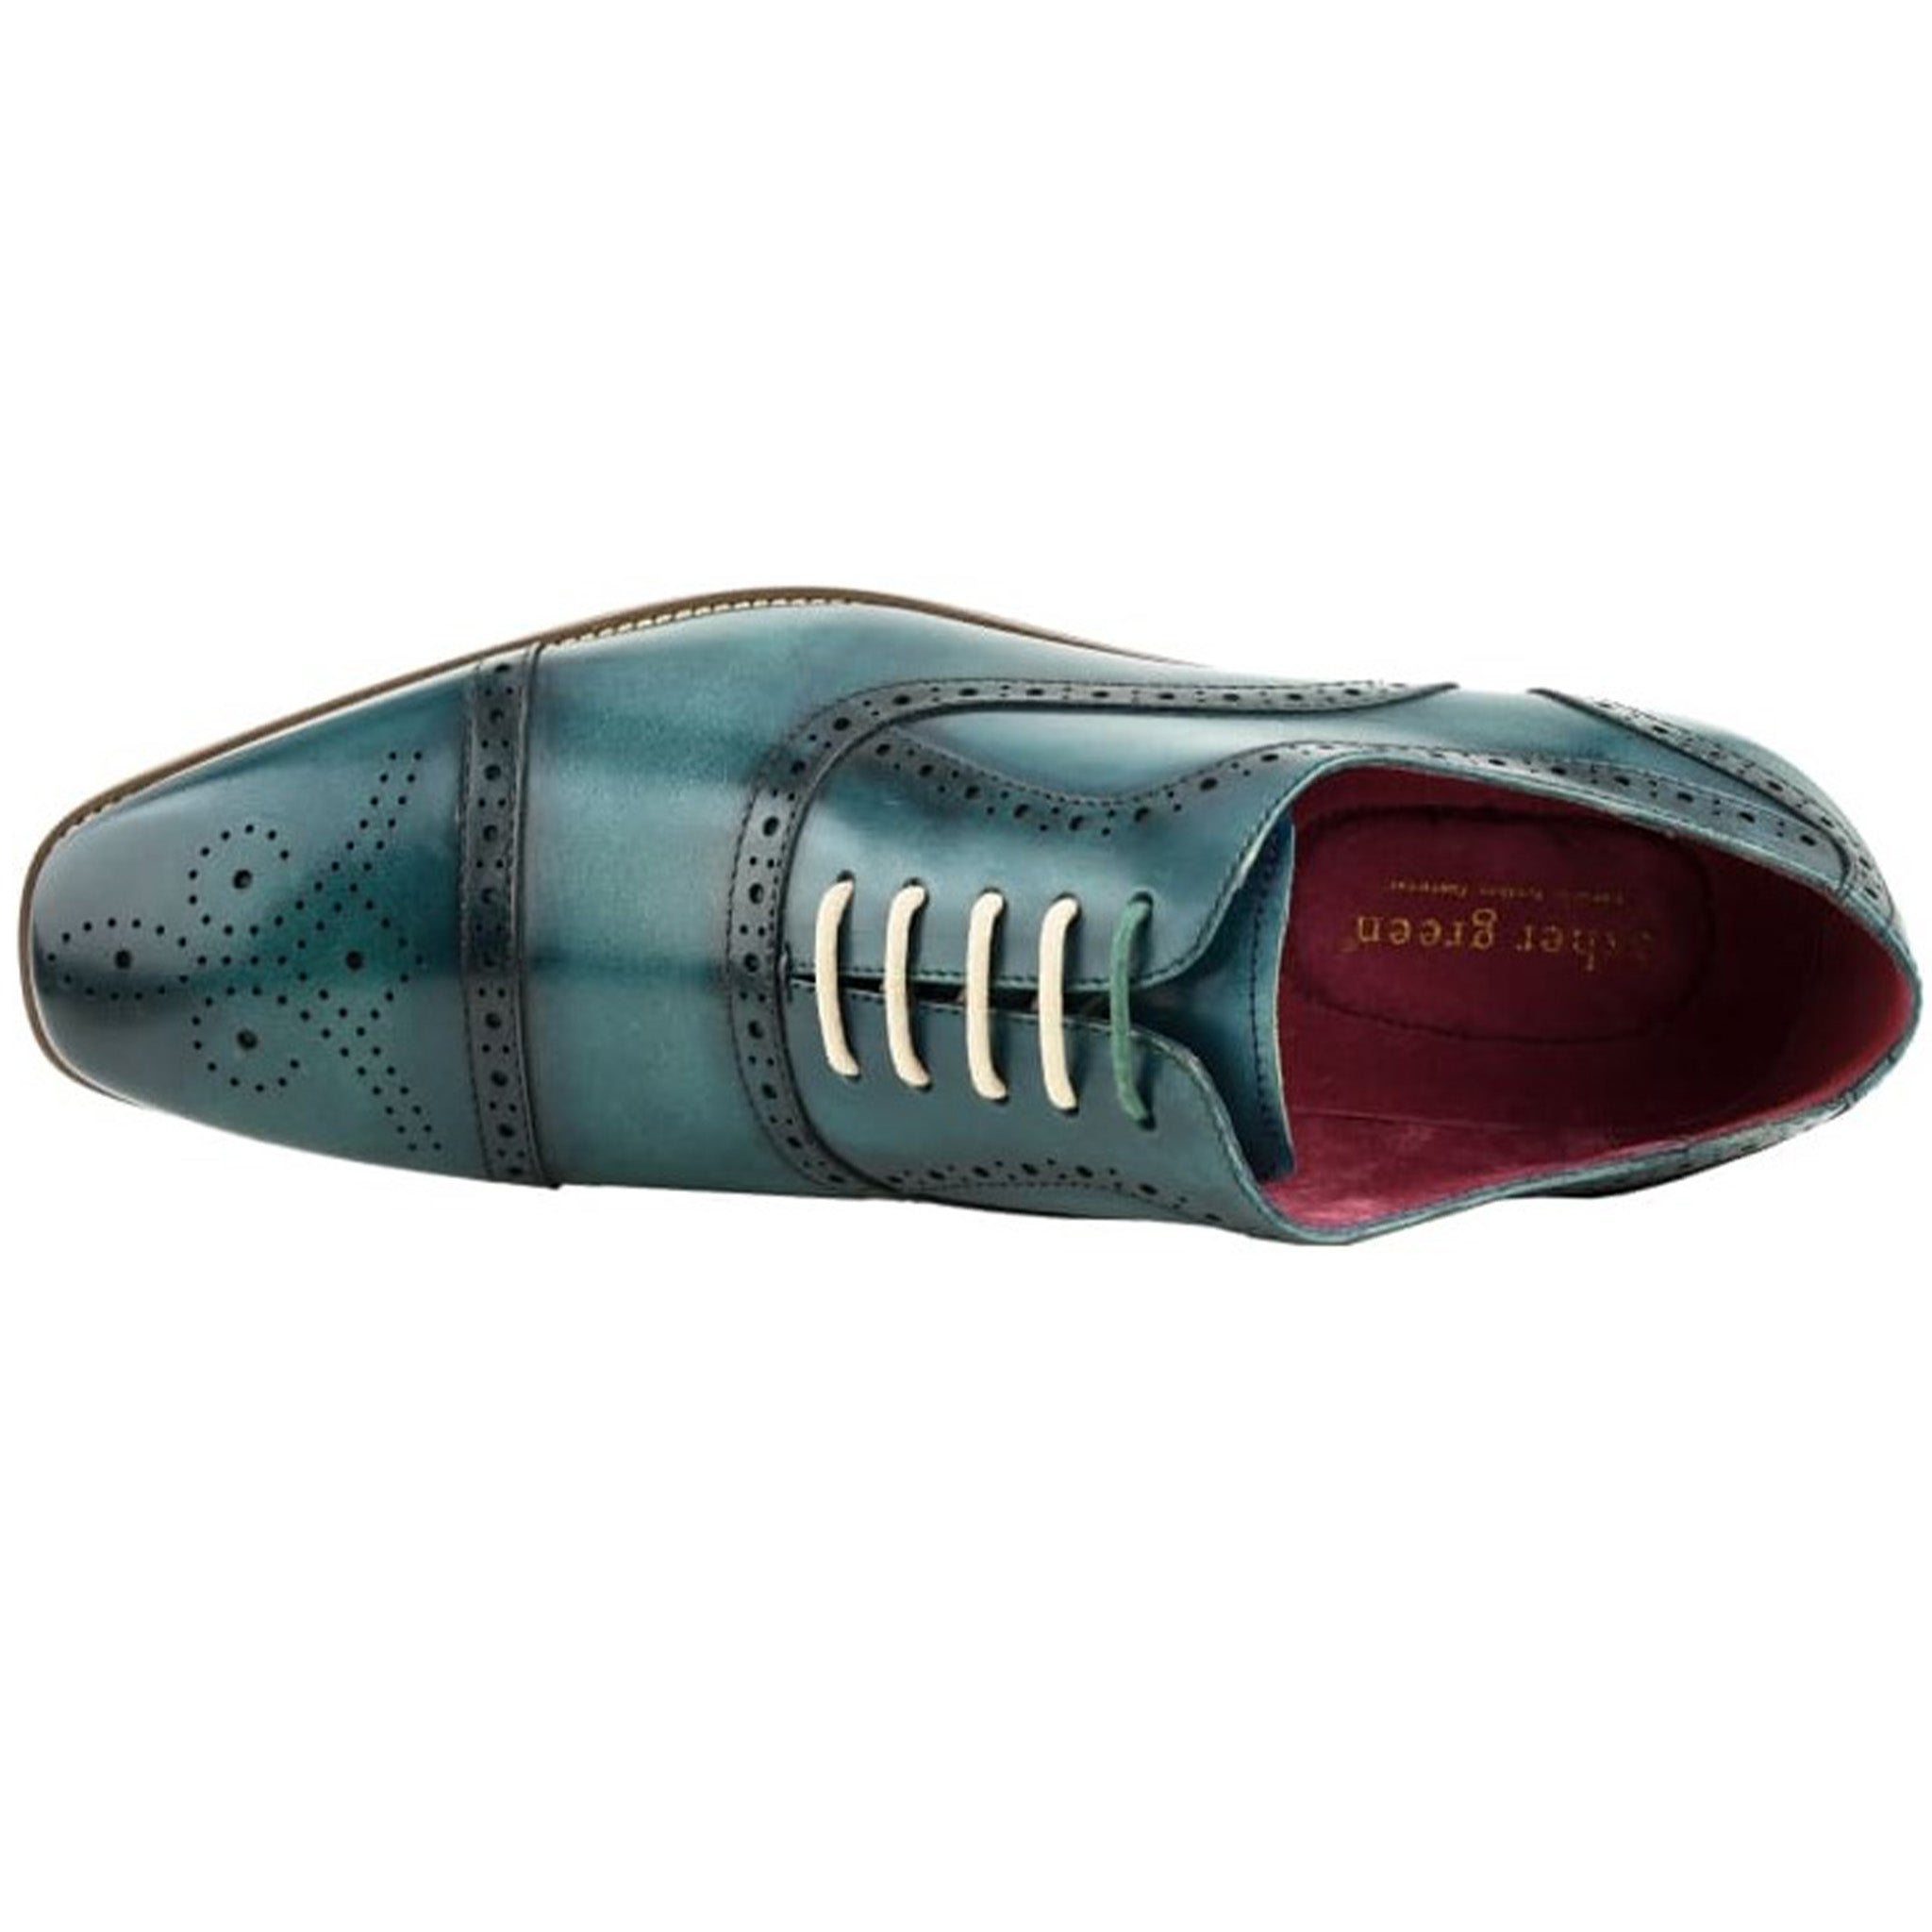 Turquoise Leather Oxford Shoes